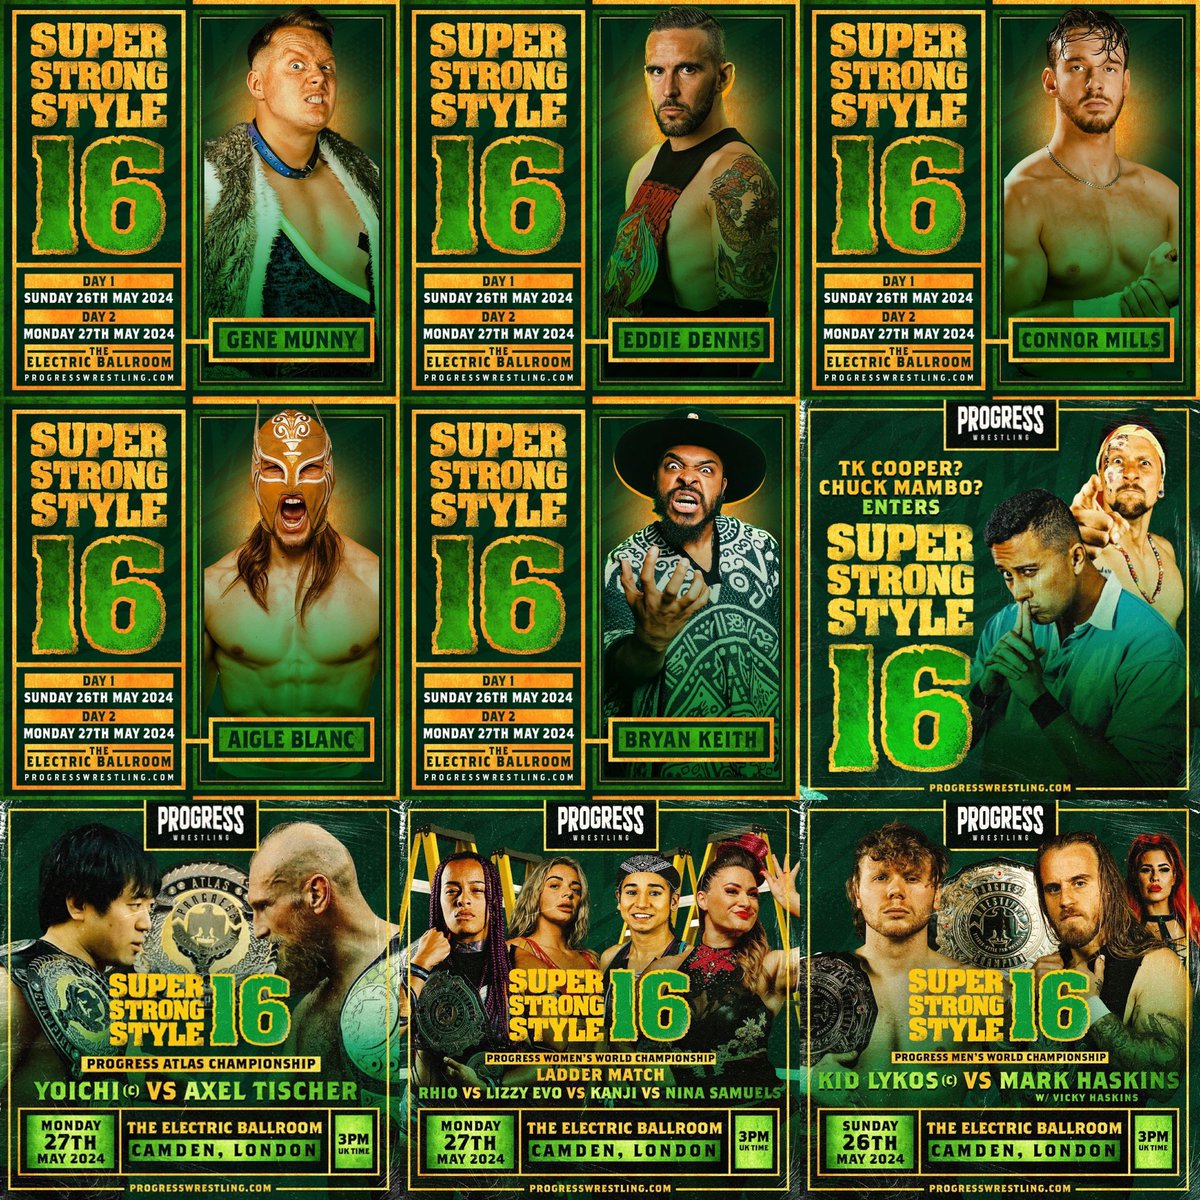 🚨 SUPER STRONG STYLE 16 ‼️ 24 days to go until the start of the #SSS16 tournament! 📅 SUN 26th & MON 27th MAY | 3PM | Electric Ballroom, London 🎟️ Progresswrestling.com/tickets